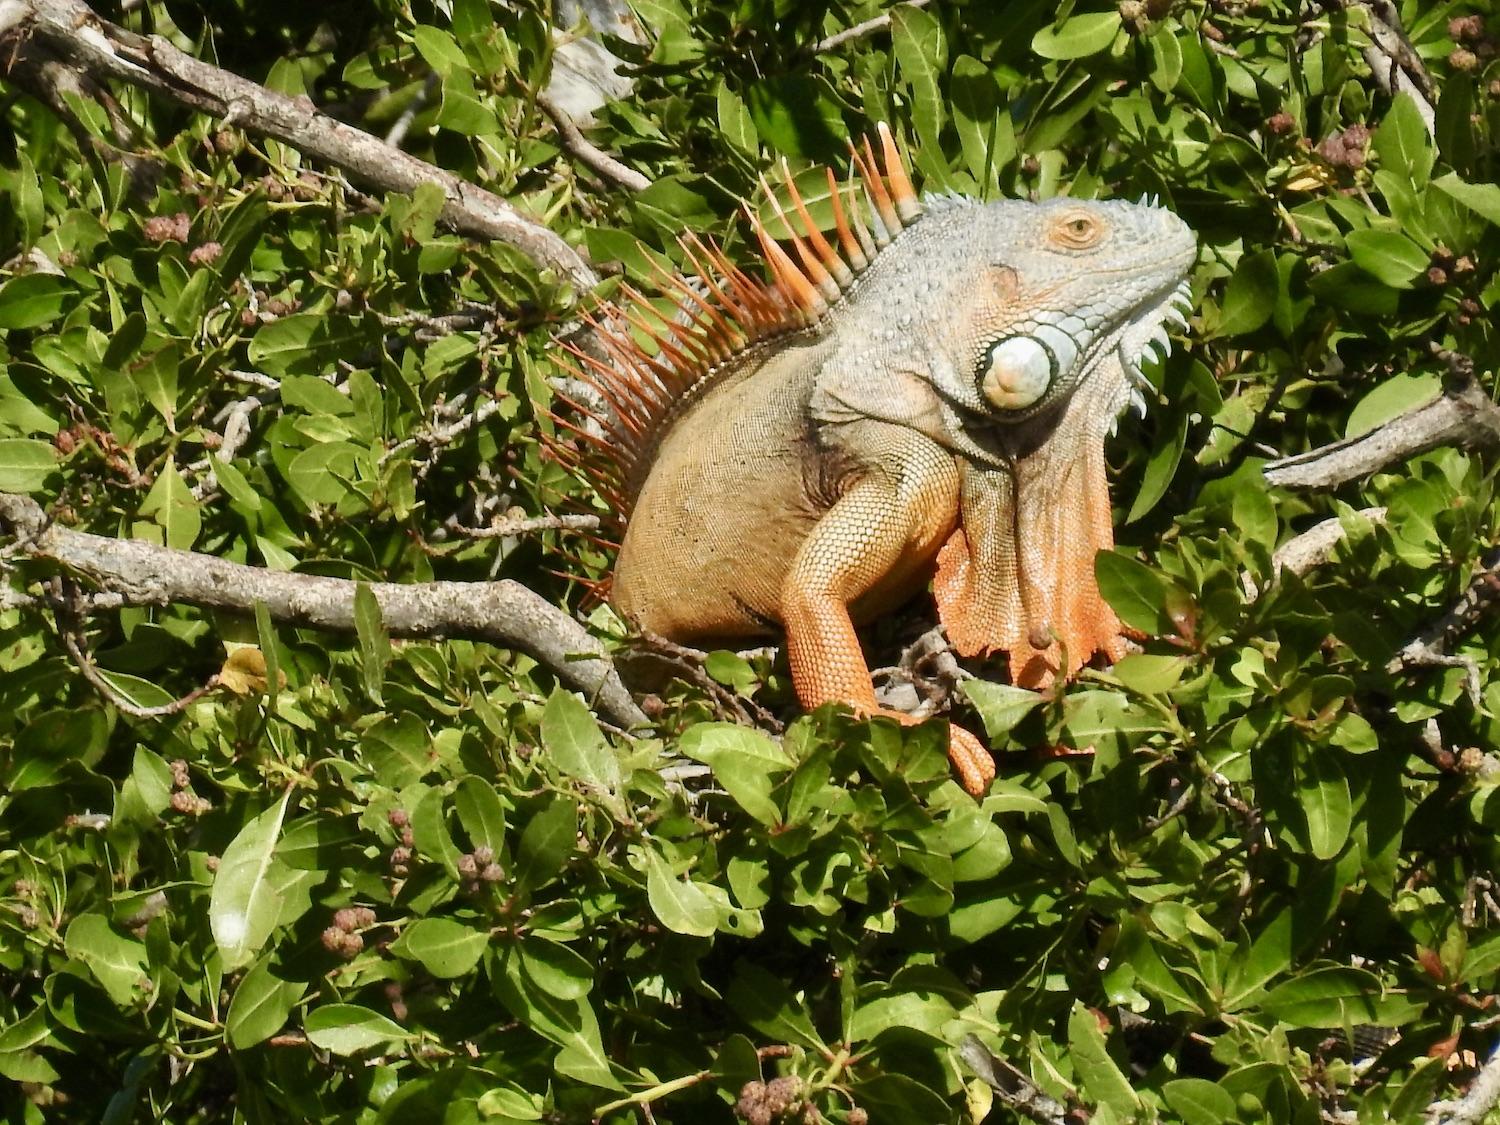 Tourists love the Green Iguanas of St. Martin, especially when the males turn orange. But they're also a much-loathed invasive species.